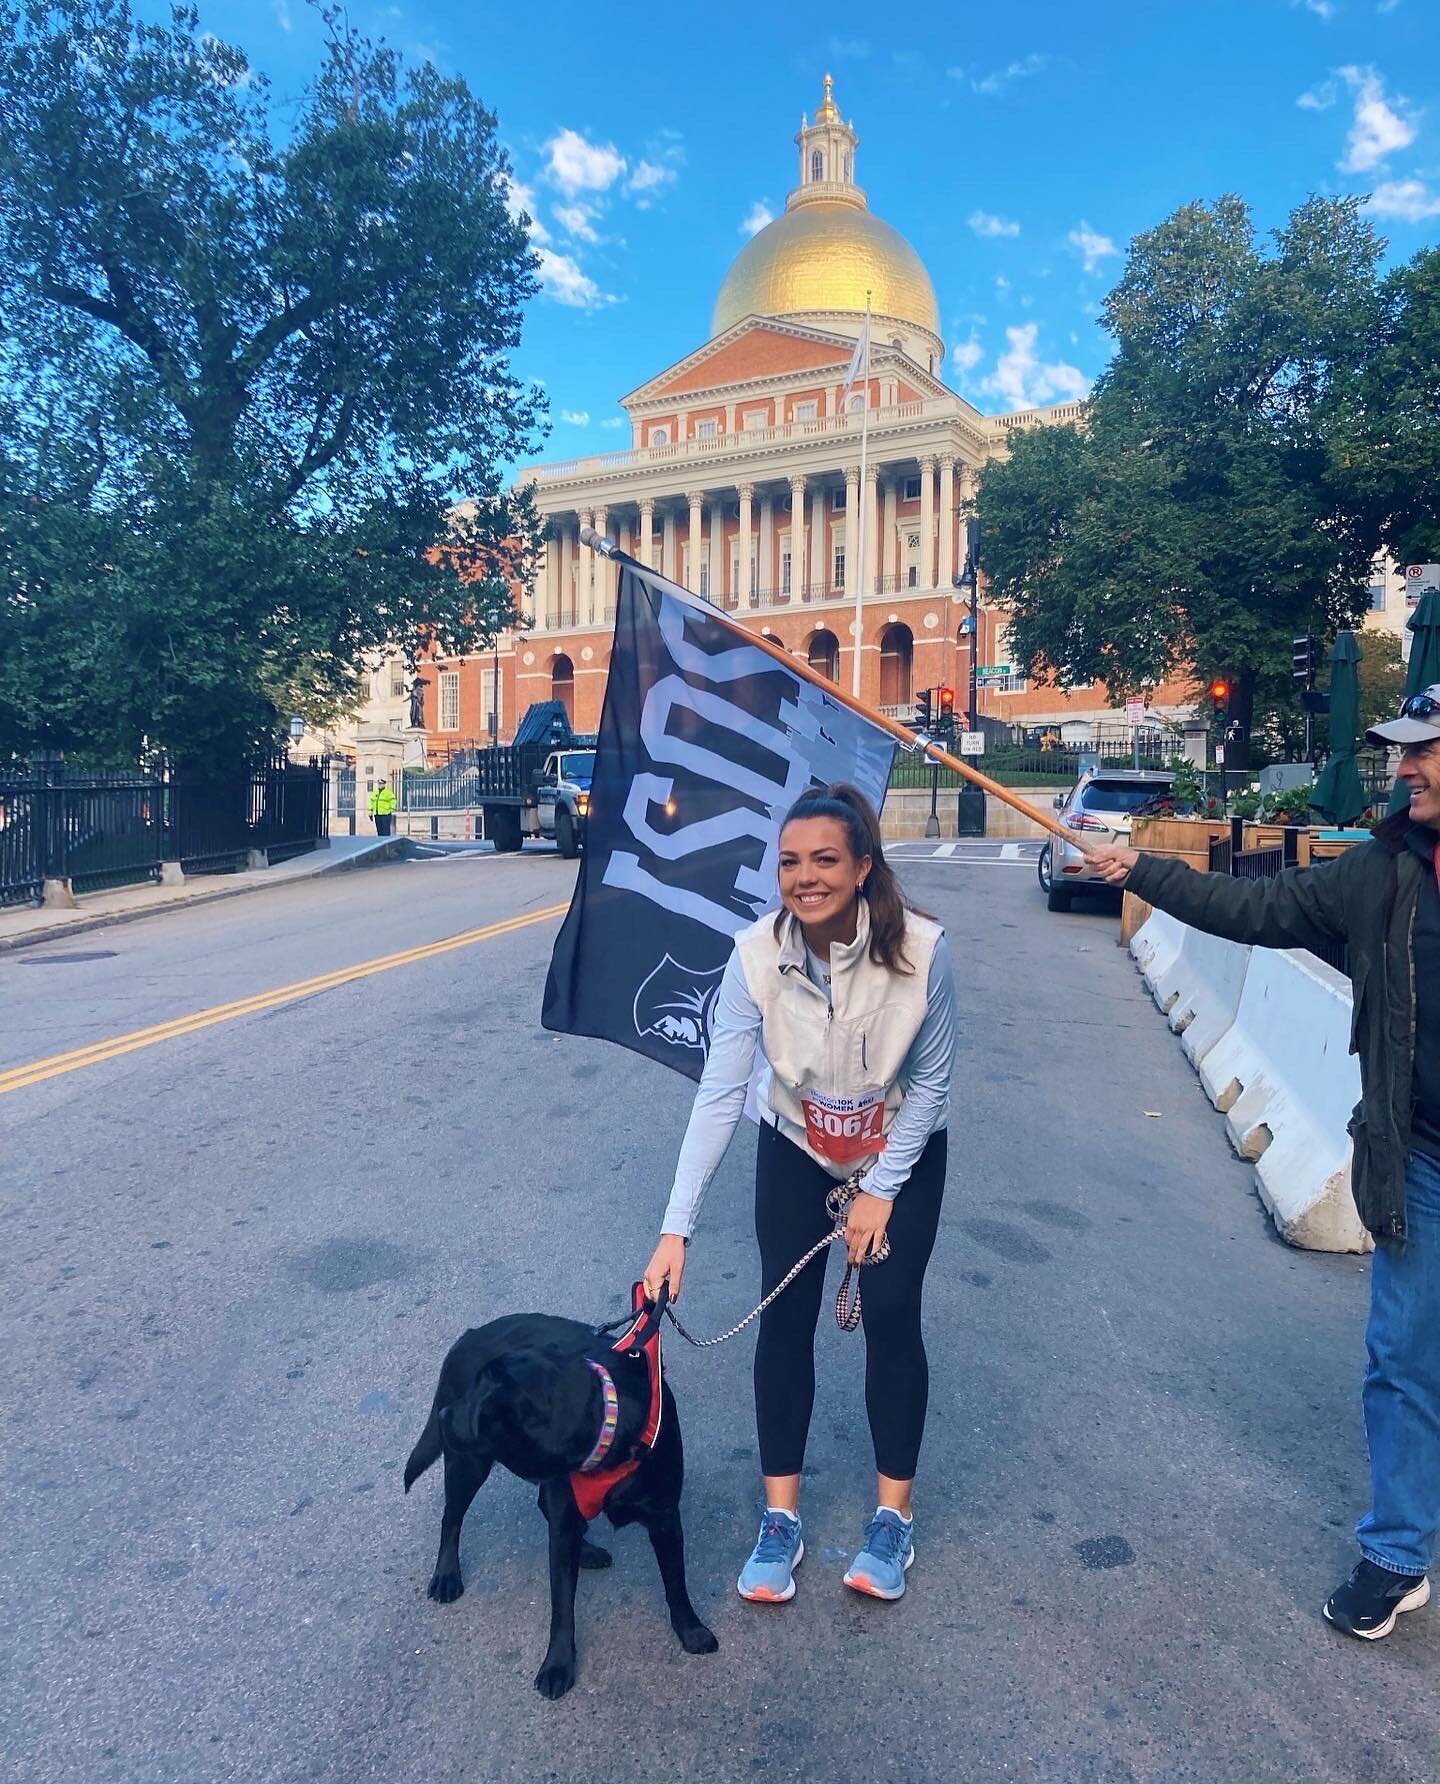 Who&rsquo;s excited for Marathon Monday in Boston?! We sure are here at Hounds in the Hub, especially because one of our favorite part-time staff members &mdash; Liz Foley @elizabeth_foley5 &mdash; is running in the marathon!!! Liz grew up in Mattapo